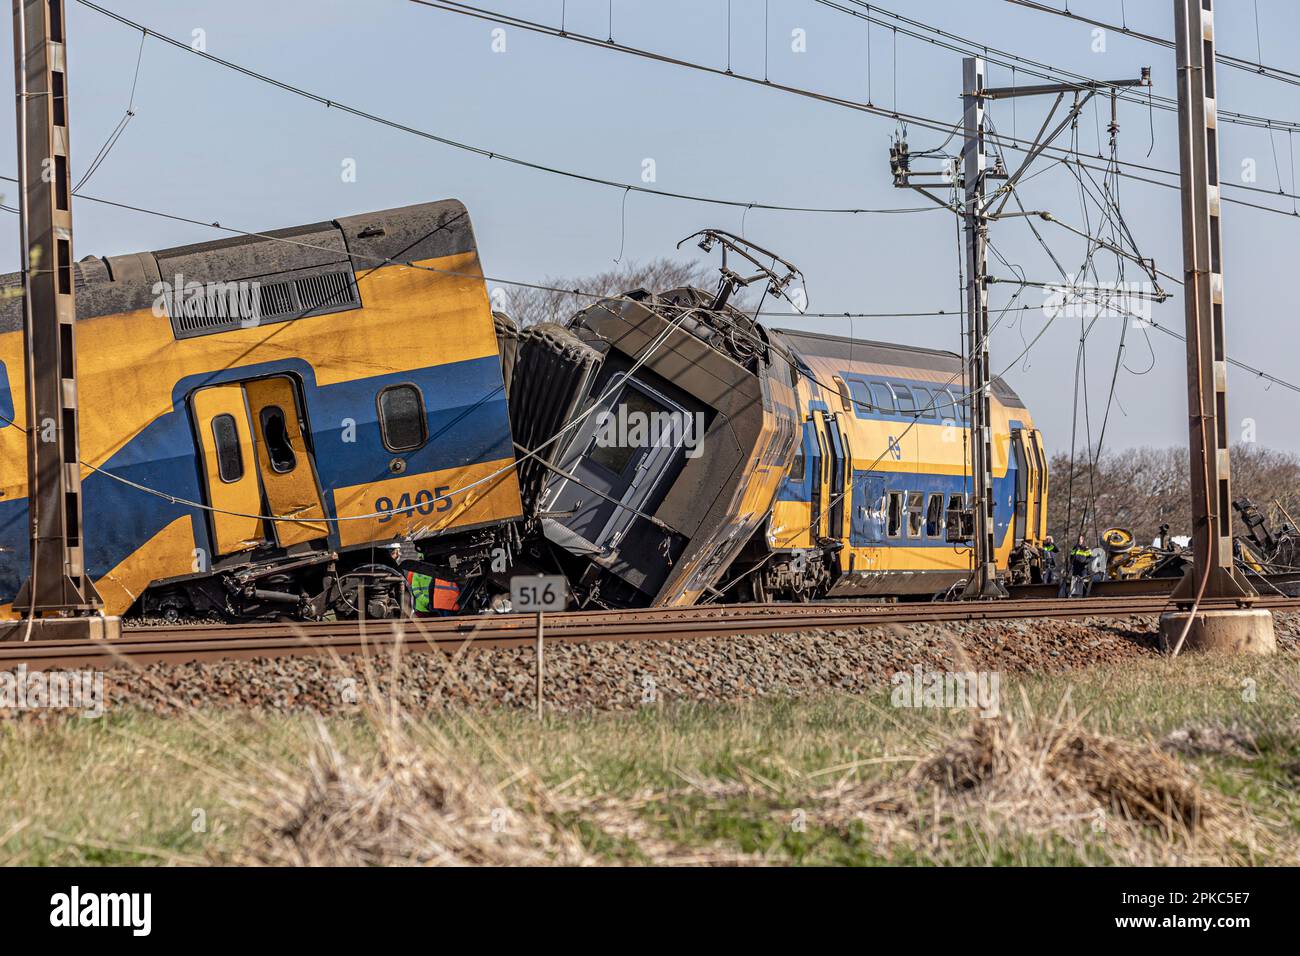 Voorschoten, Netherlands. 04th Apr, 2023. A view of a damaged carriage. A train collided with heavy construction equipment and derailment of the carriages near Leiden and the Hague. The Dutch railway crash resulted deadly, killing one person and injuring 30. Emergency services workers and police were on the scene to assess the damage. The accident took place in Voorschoten in the Netherlands. (Photo by Nik Oiko/SOPA Images/Sipa USA) Credit: Sipa USA/Alamy Live News Stock Photo